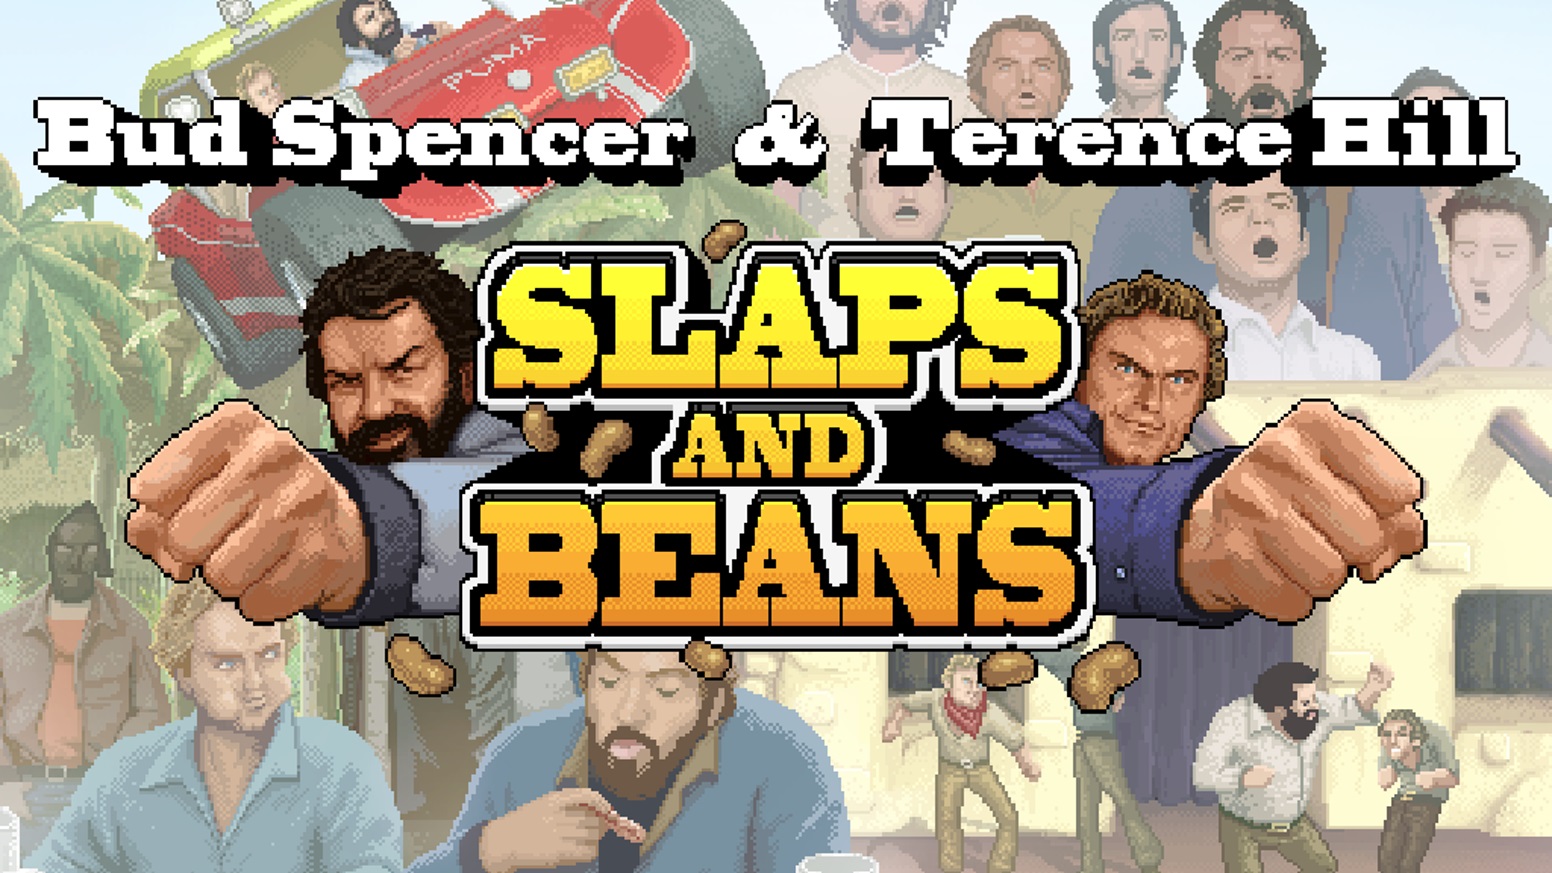 Bud Spencer & Terence Hill - Slaps And Beans added to the Switch eShop